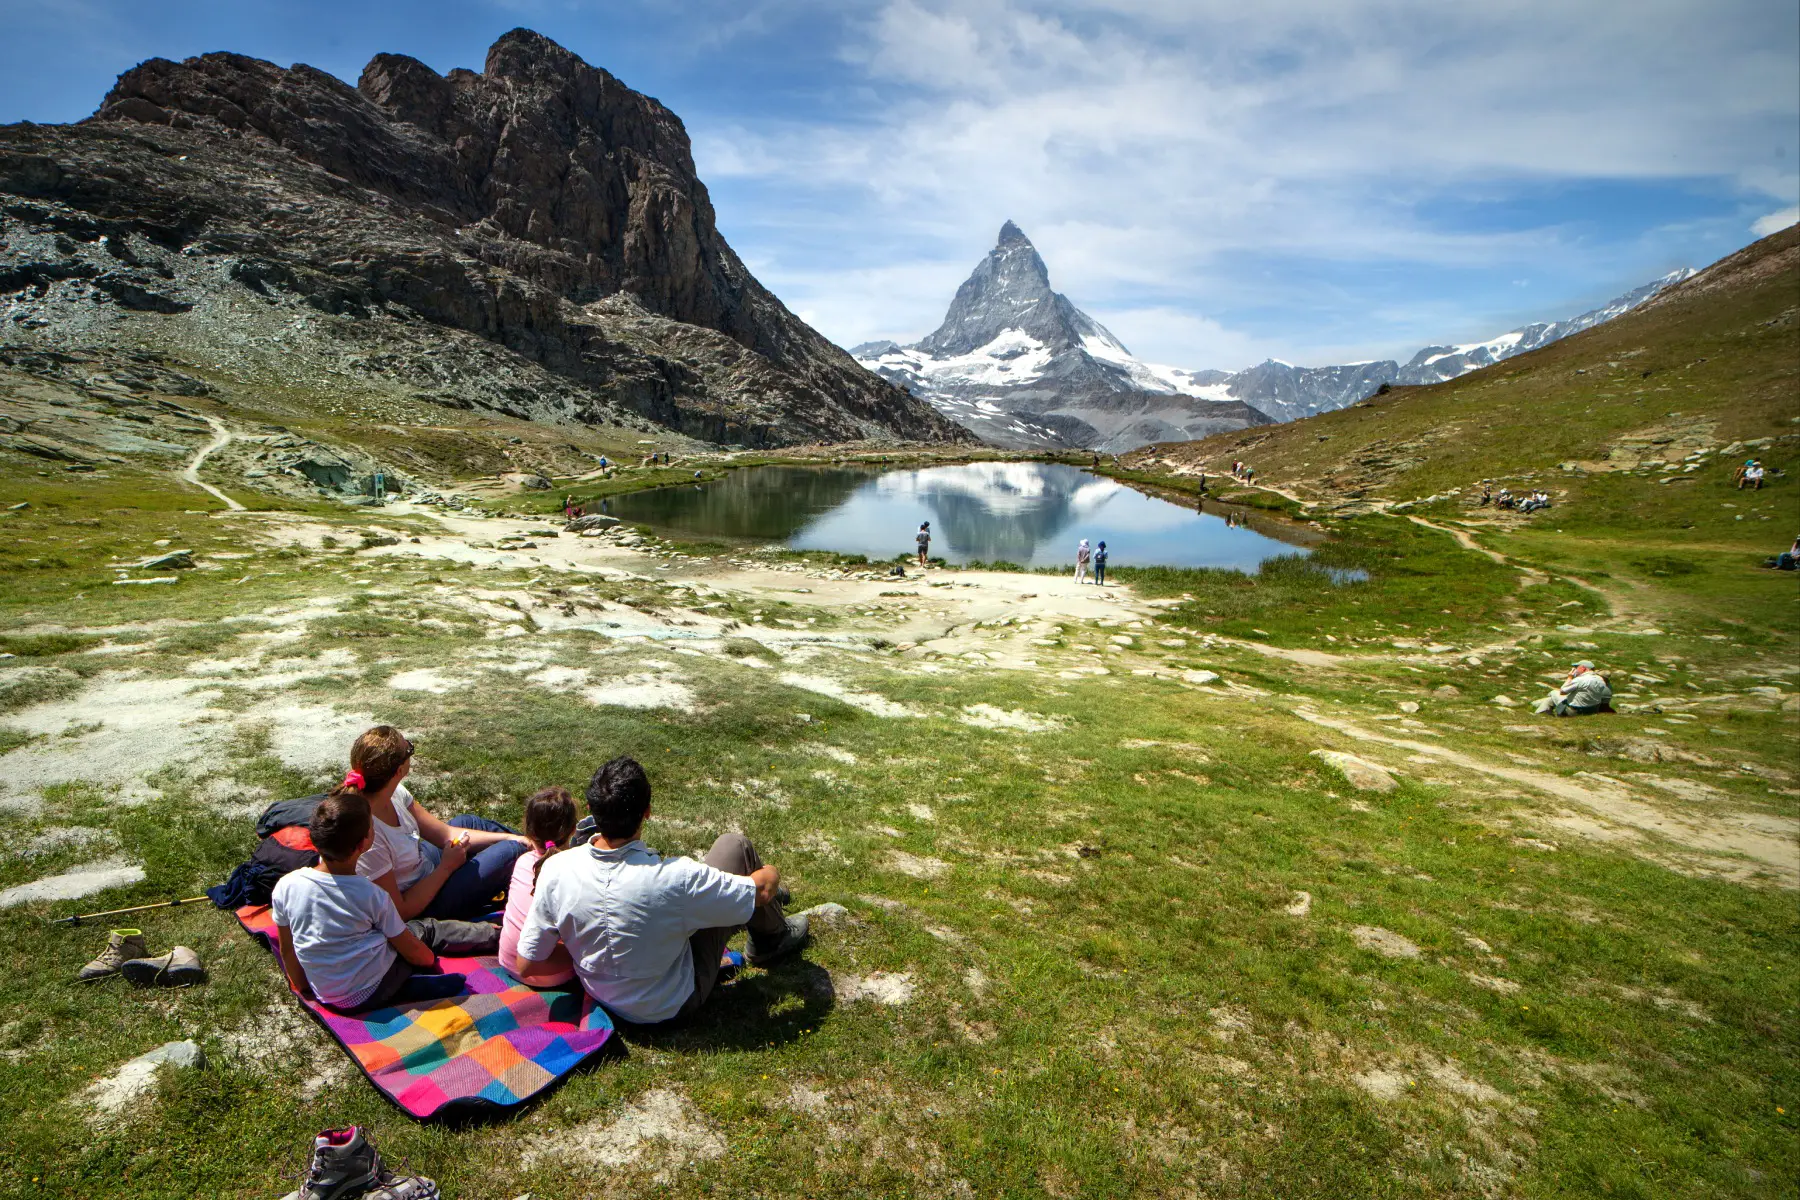 Family of four sitting on picnic mat looking at Matterhorn mountain and lake